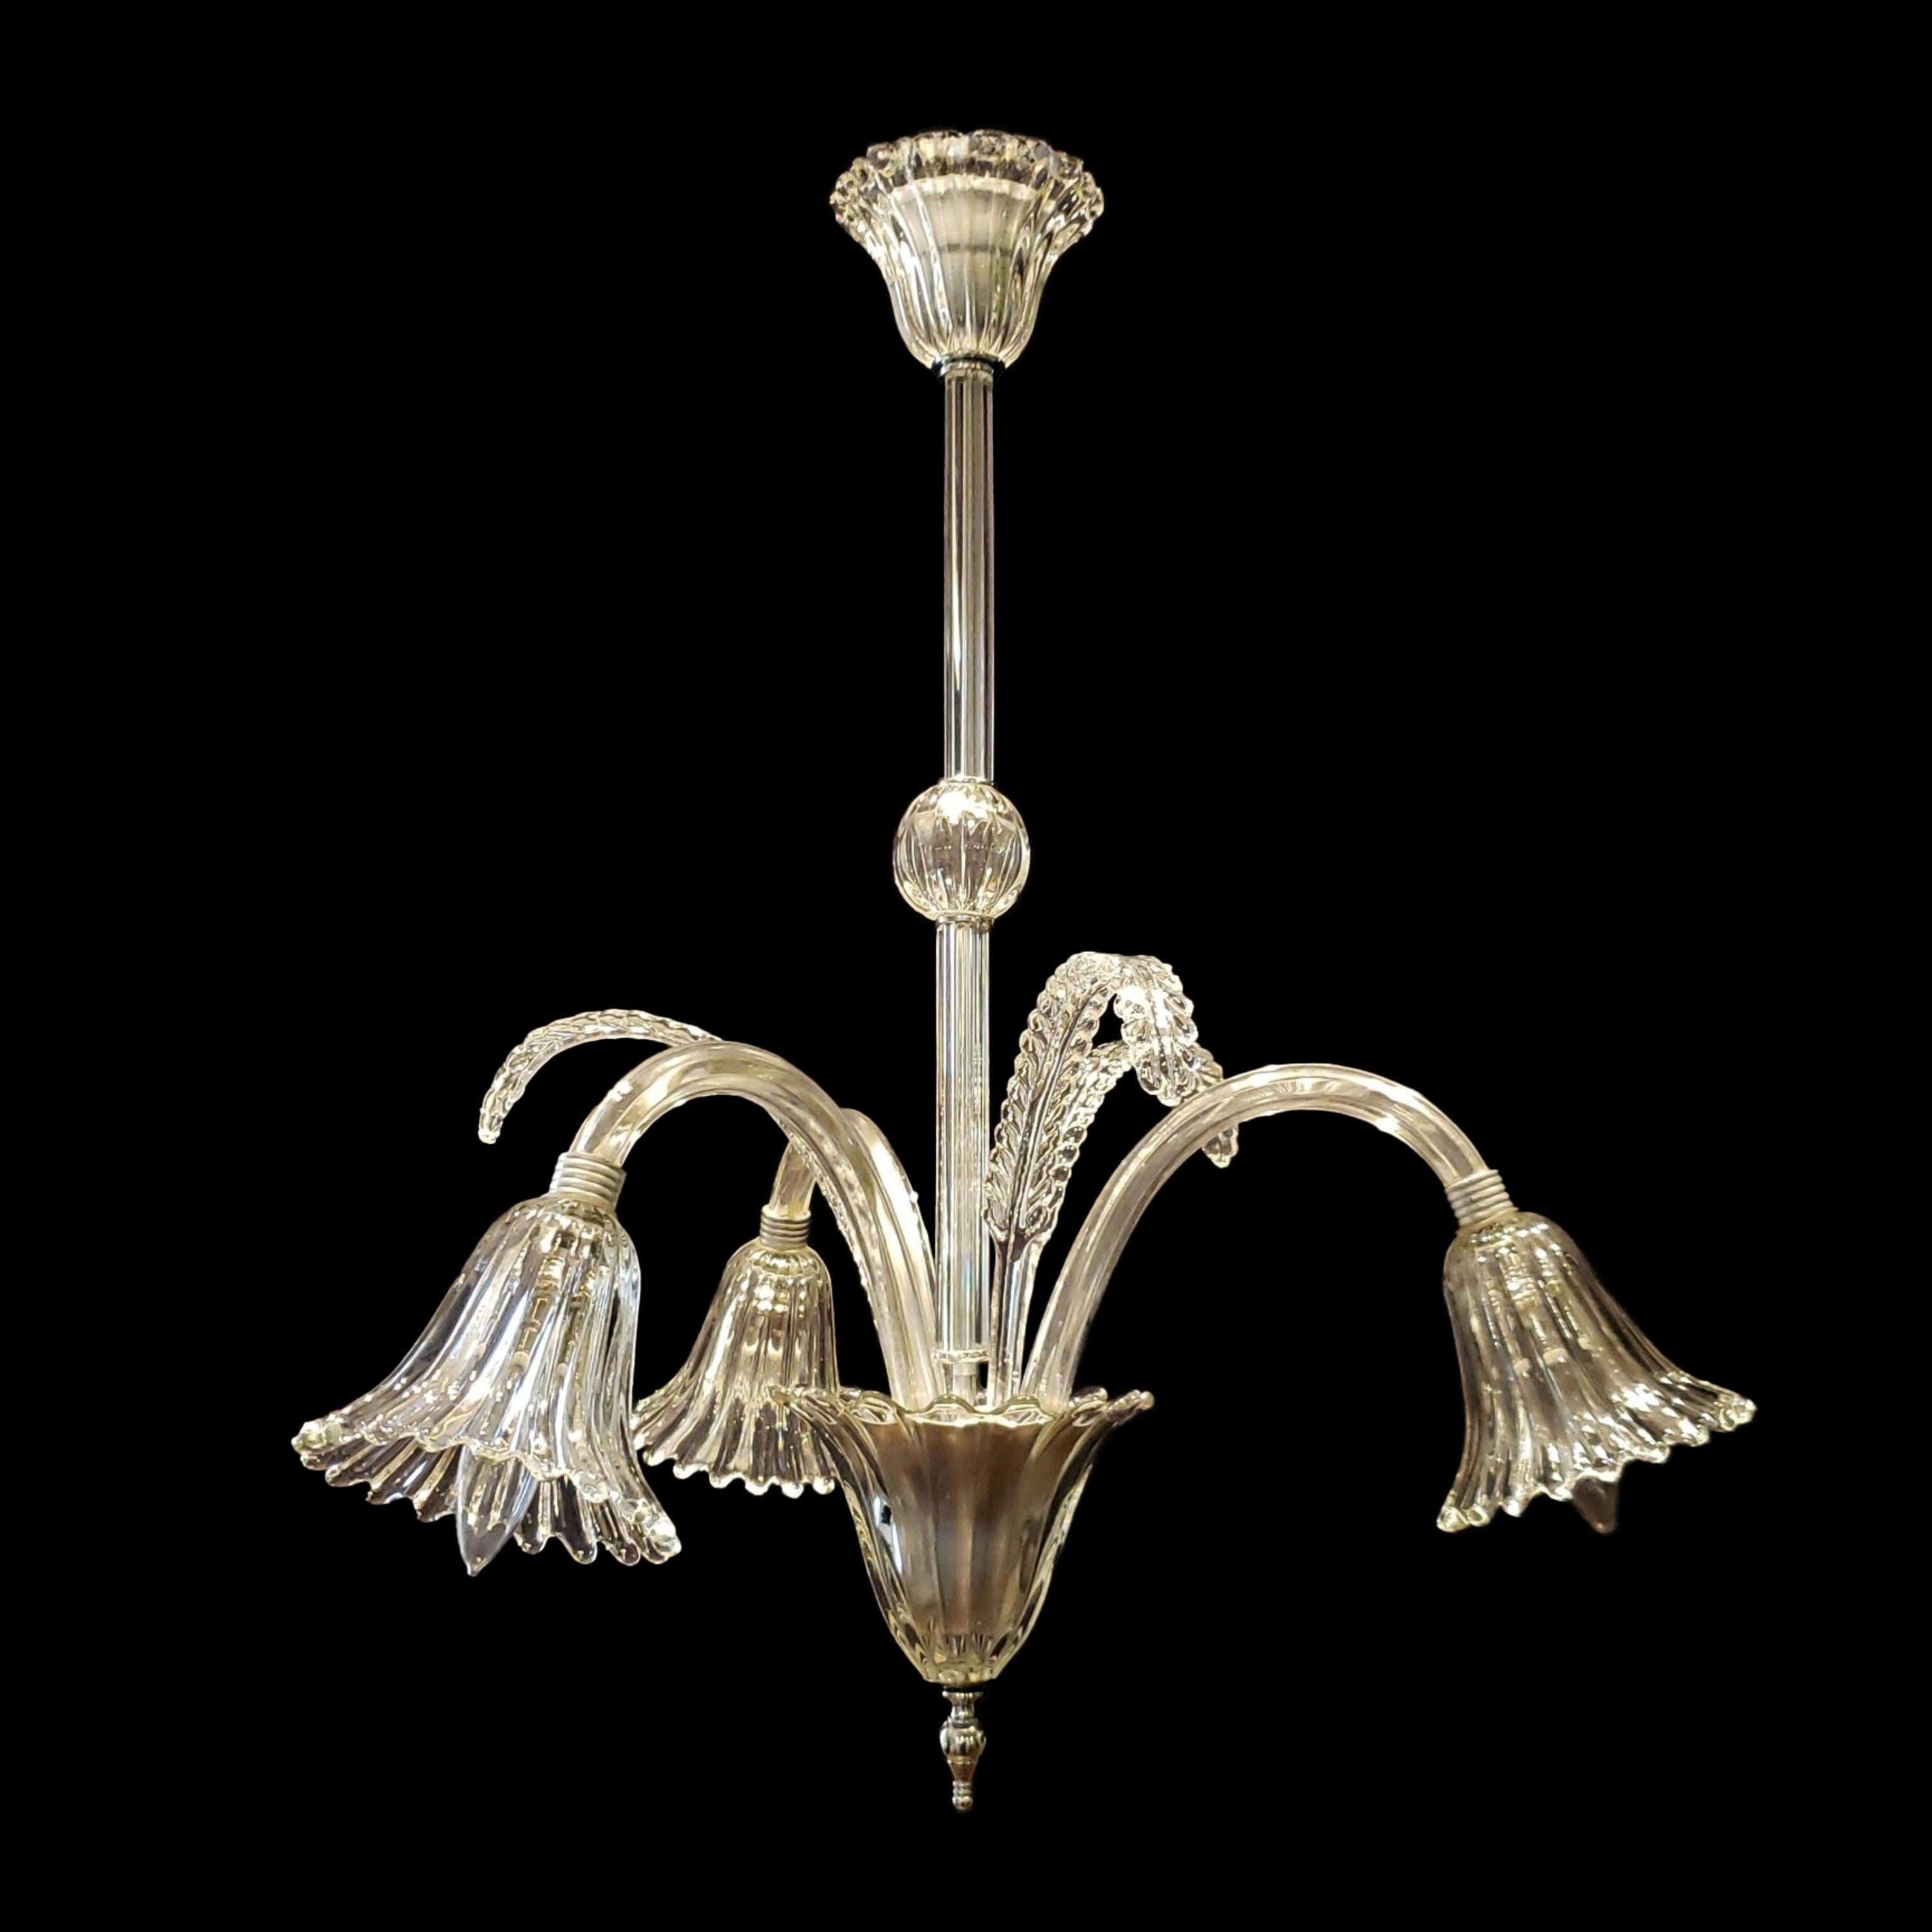 Hand made three down light Murano glass chandelier. This comes rewired and ready to install. Ships disassembled.  Cleaned and restored. Please note, this item is located in our Scranton, PA location.